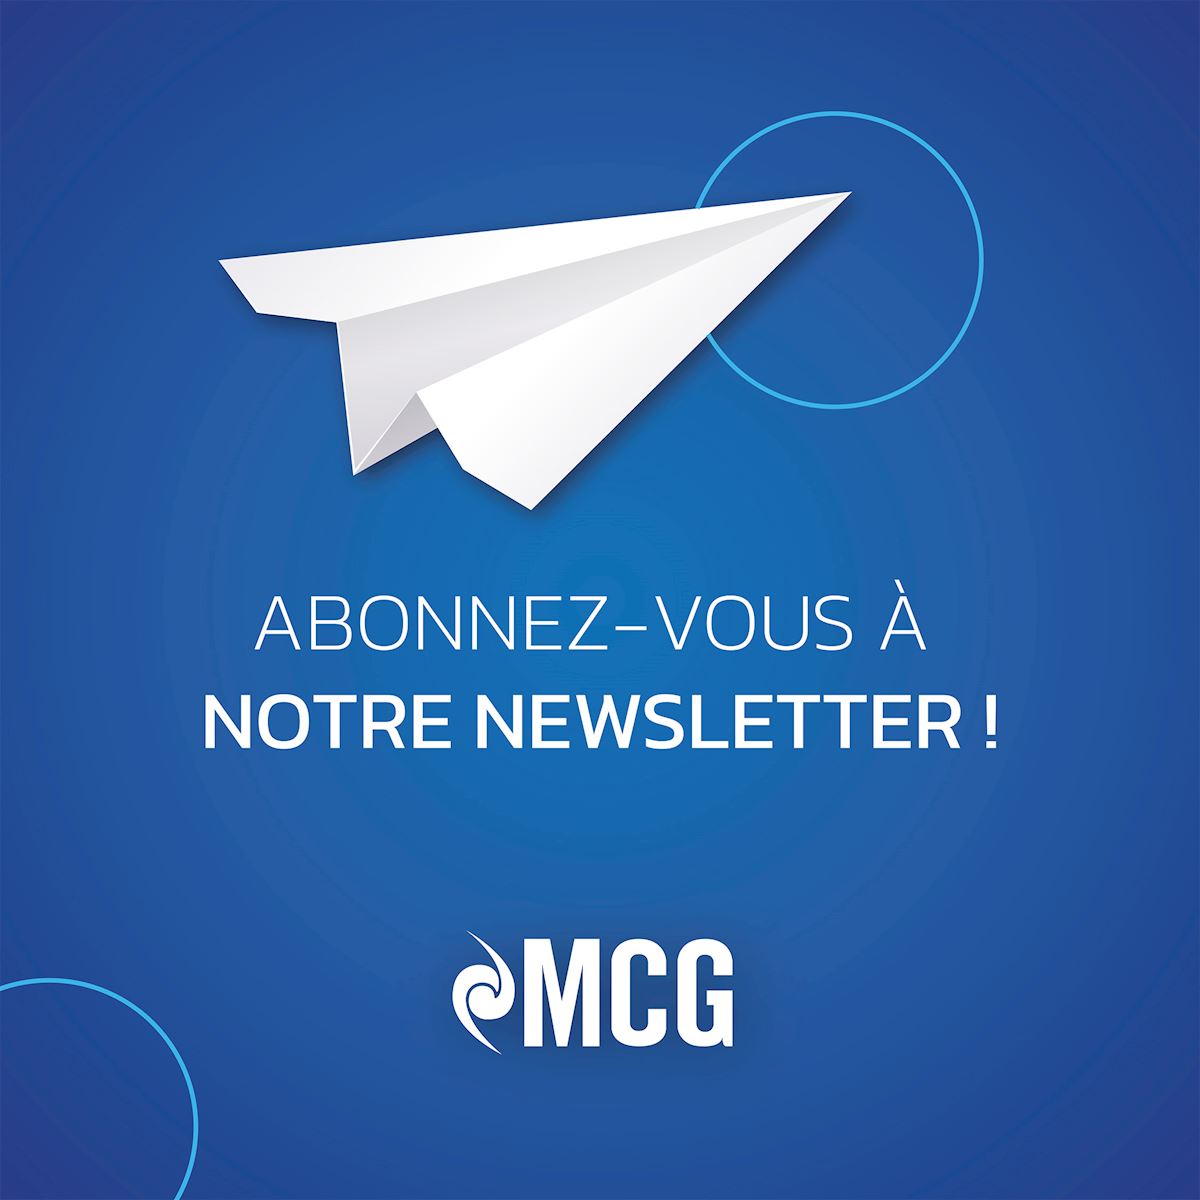 Receive our newsletter